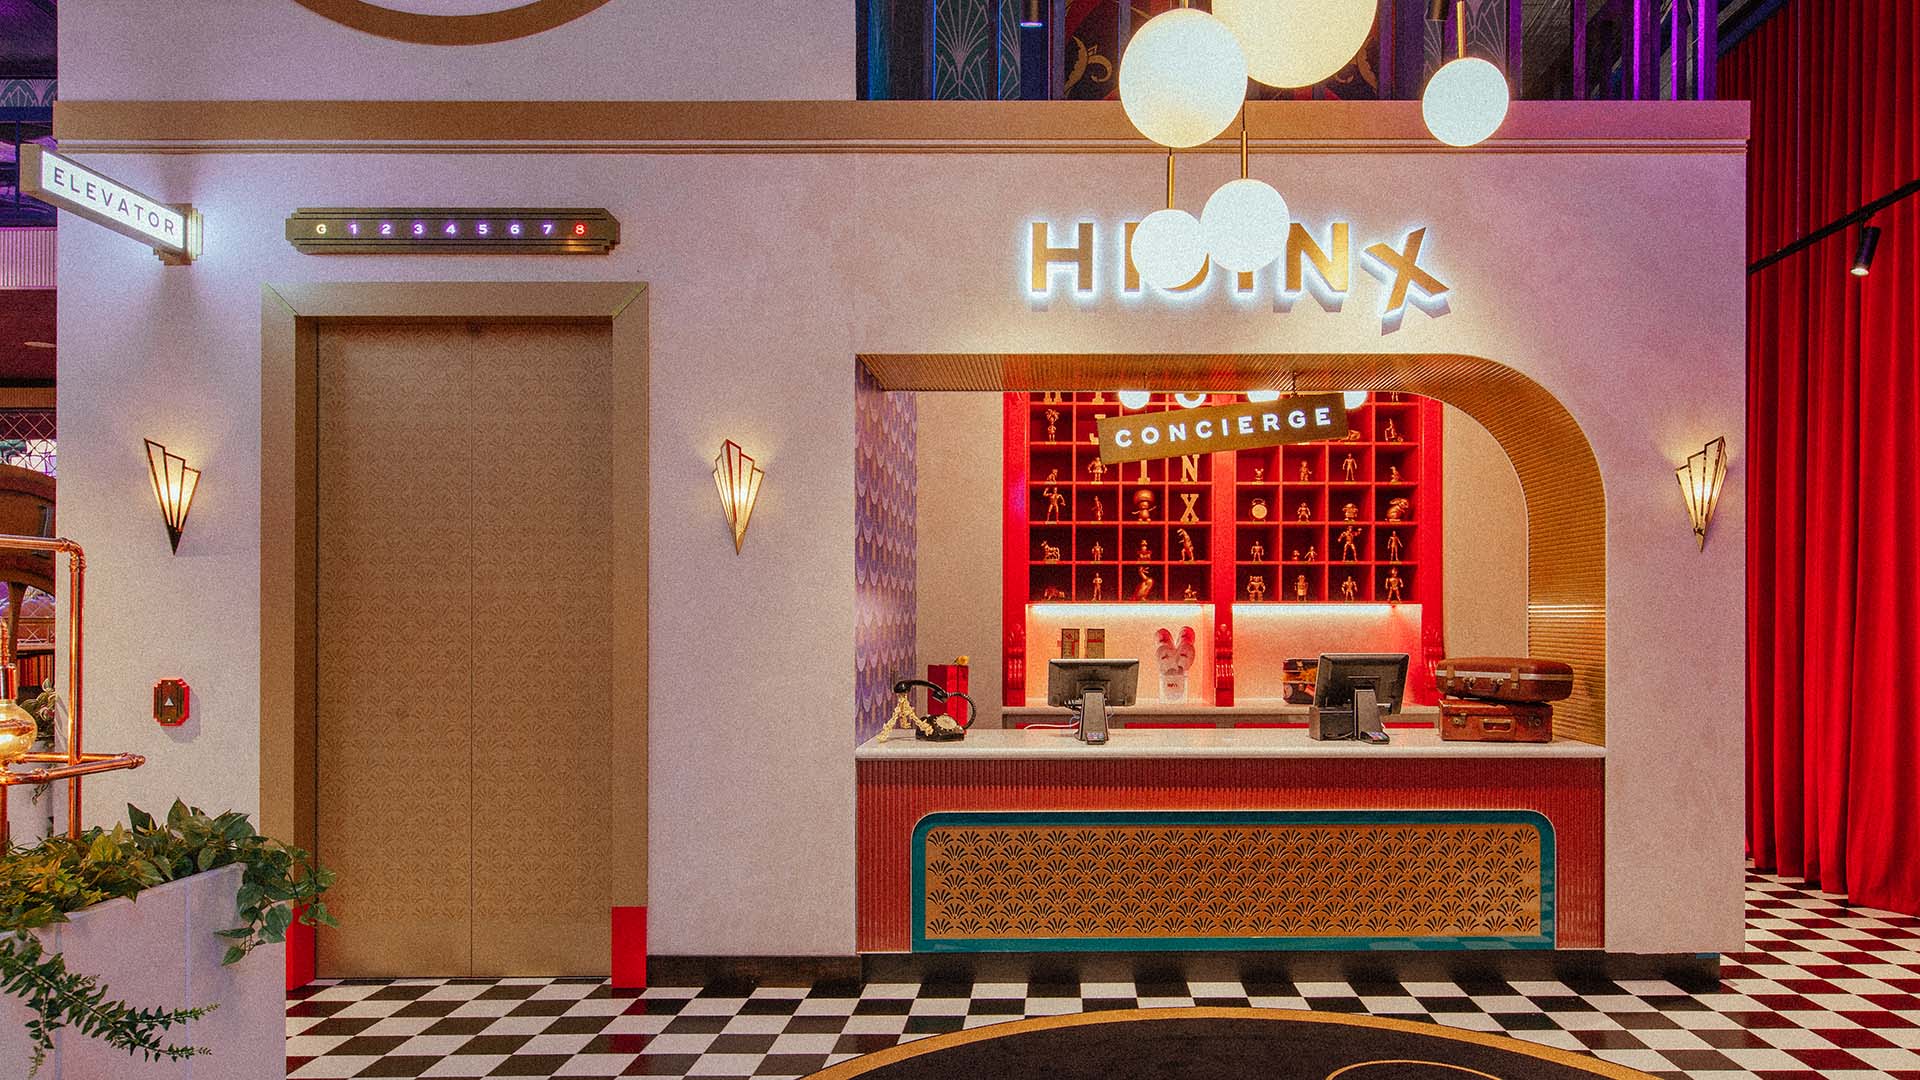 Melbourne Will Soon Be Home to a Challenge Room Hotel That You Can Play (and Drink) Your Way Through